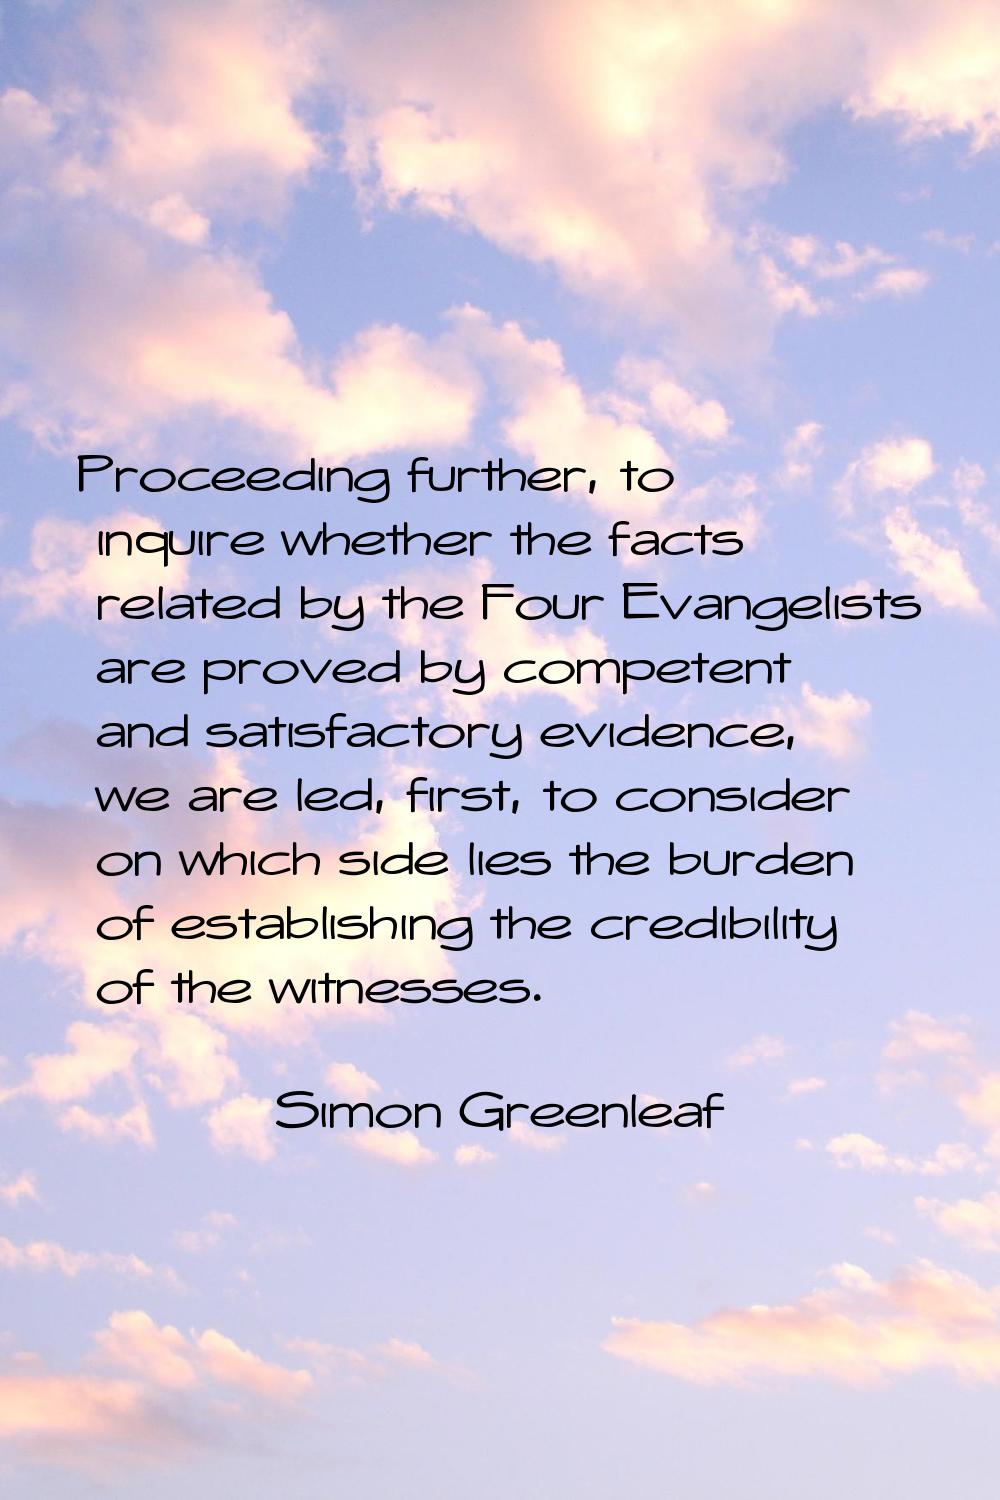 Proceeding further, to inquire whether the facts related by the Four Evangelists are proved by comp